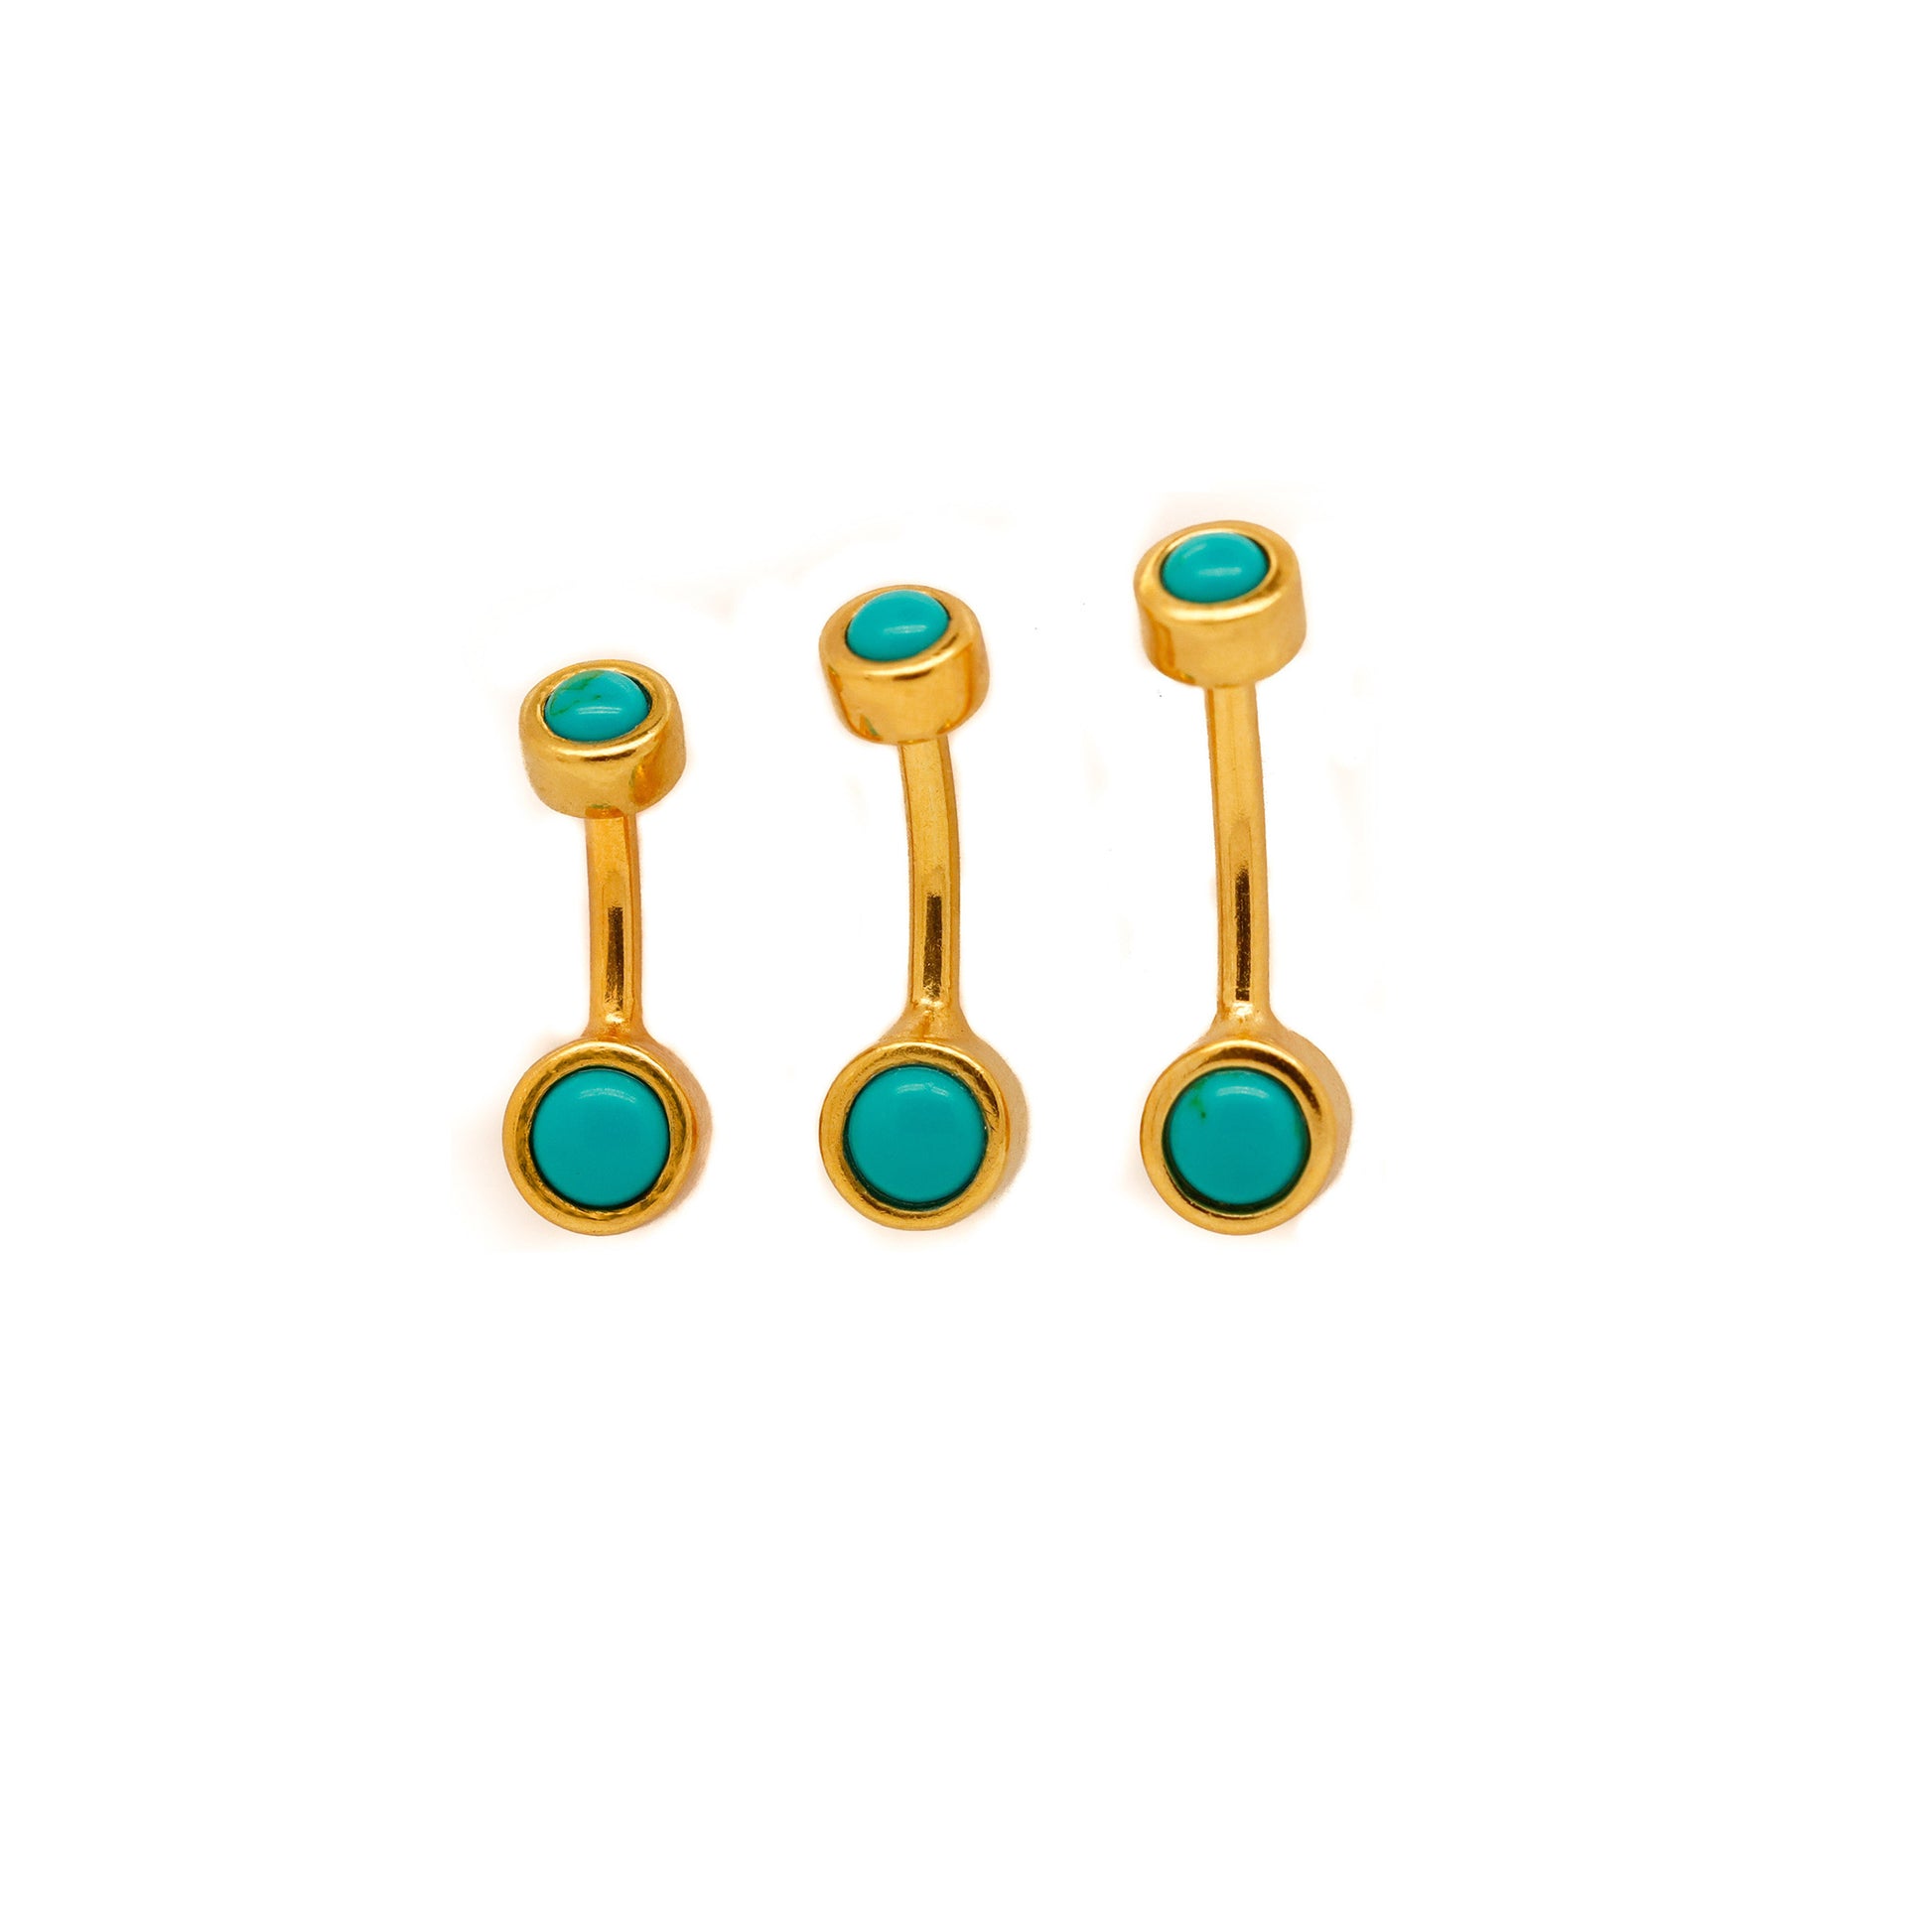 Vermeil | 24k Gold Coated 925 Silver 14G Tiny Blue Turquoise Belly Ring | 6mm 1/4" 8mm 5/16" 10mm 3/8" - Sturdy South